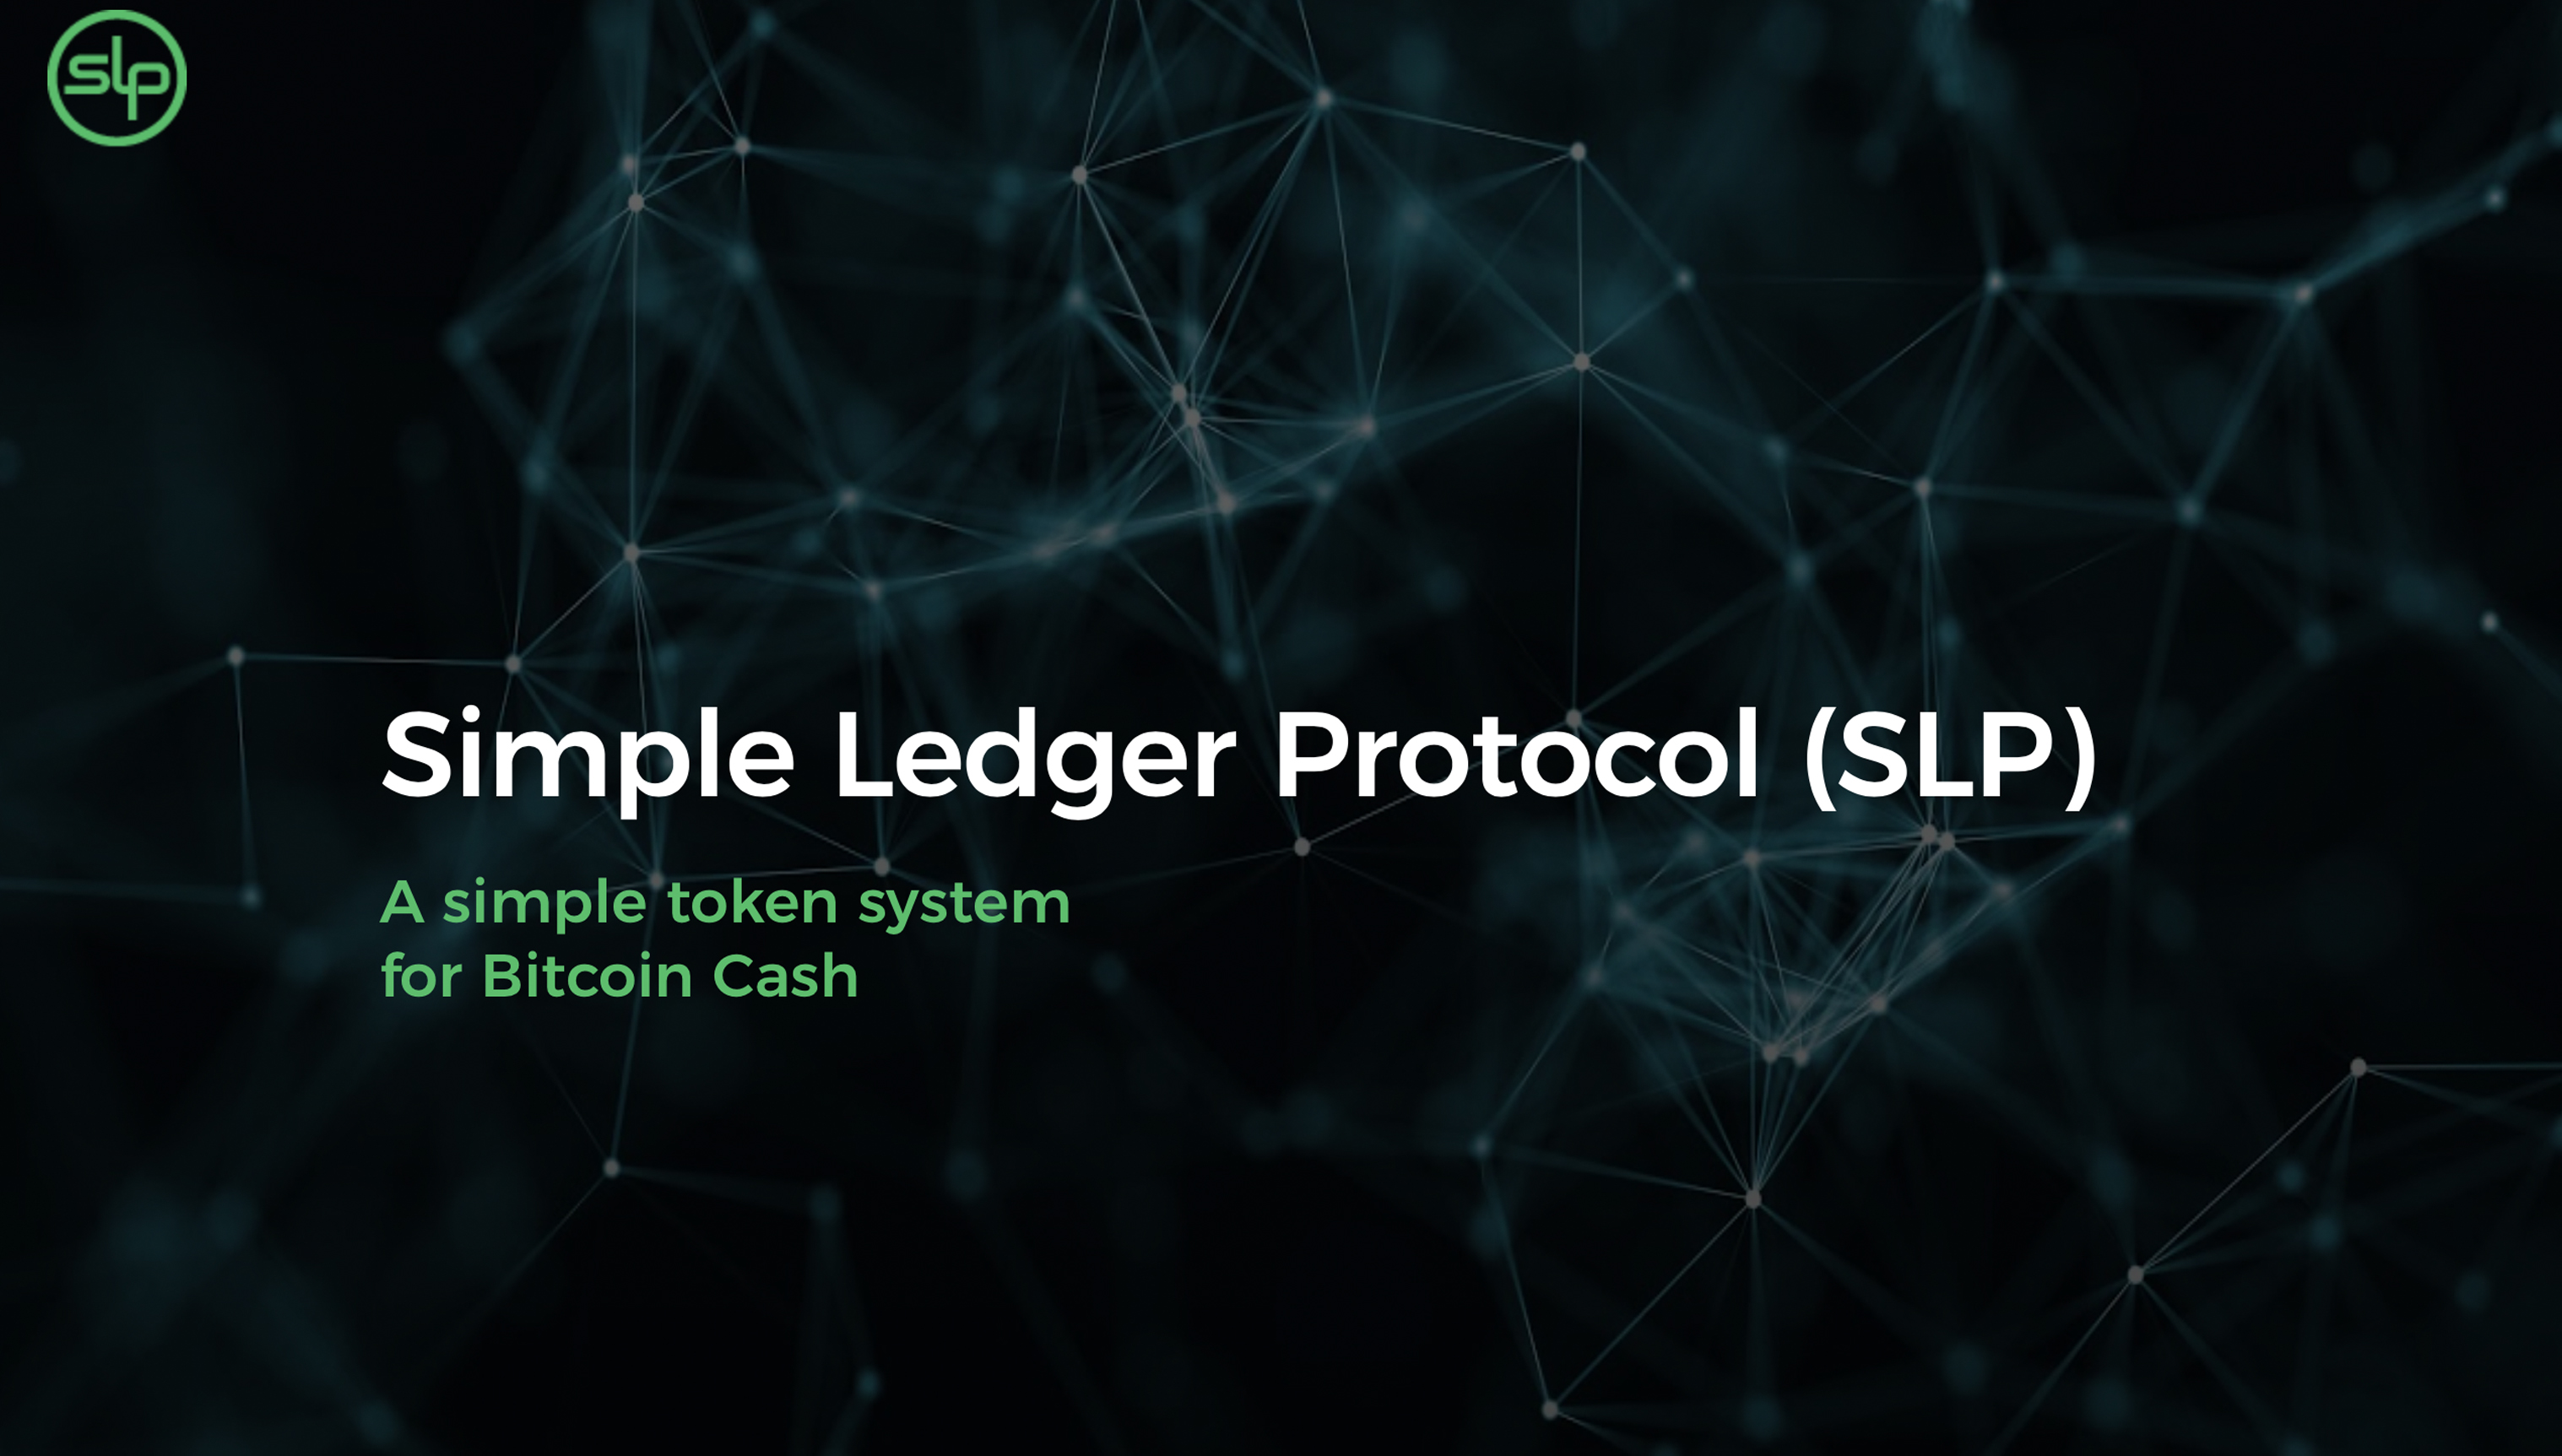 Simple Ledger Token Creation Platform Launches on the BCH Network